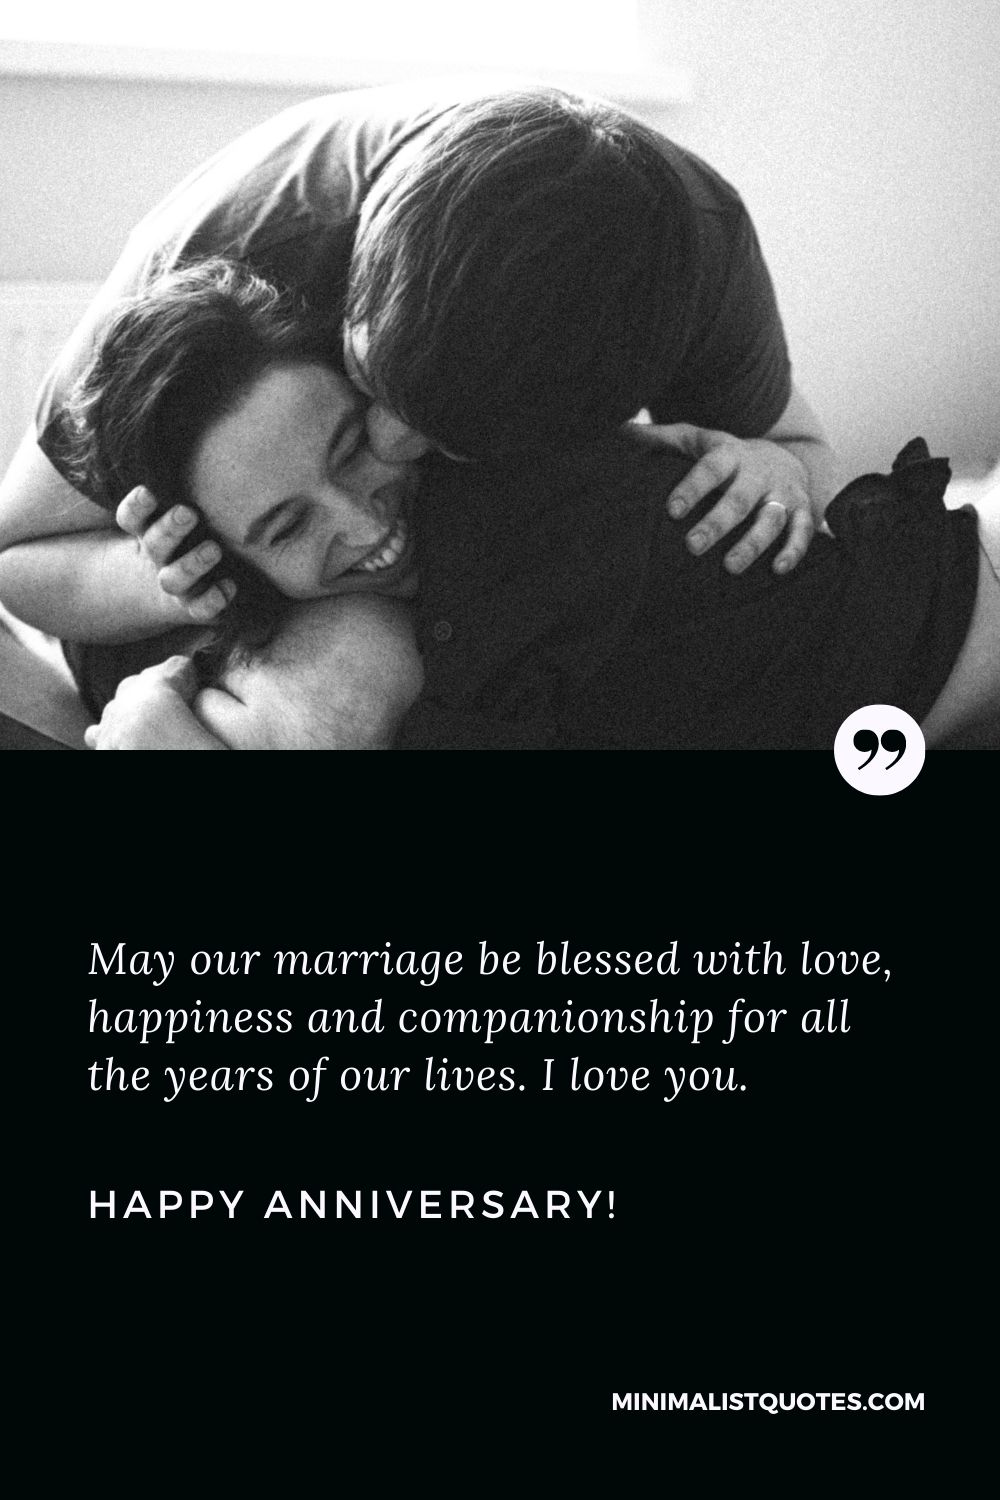 May our marriage be blessed with love, happiness and companionship ...